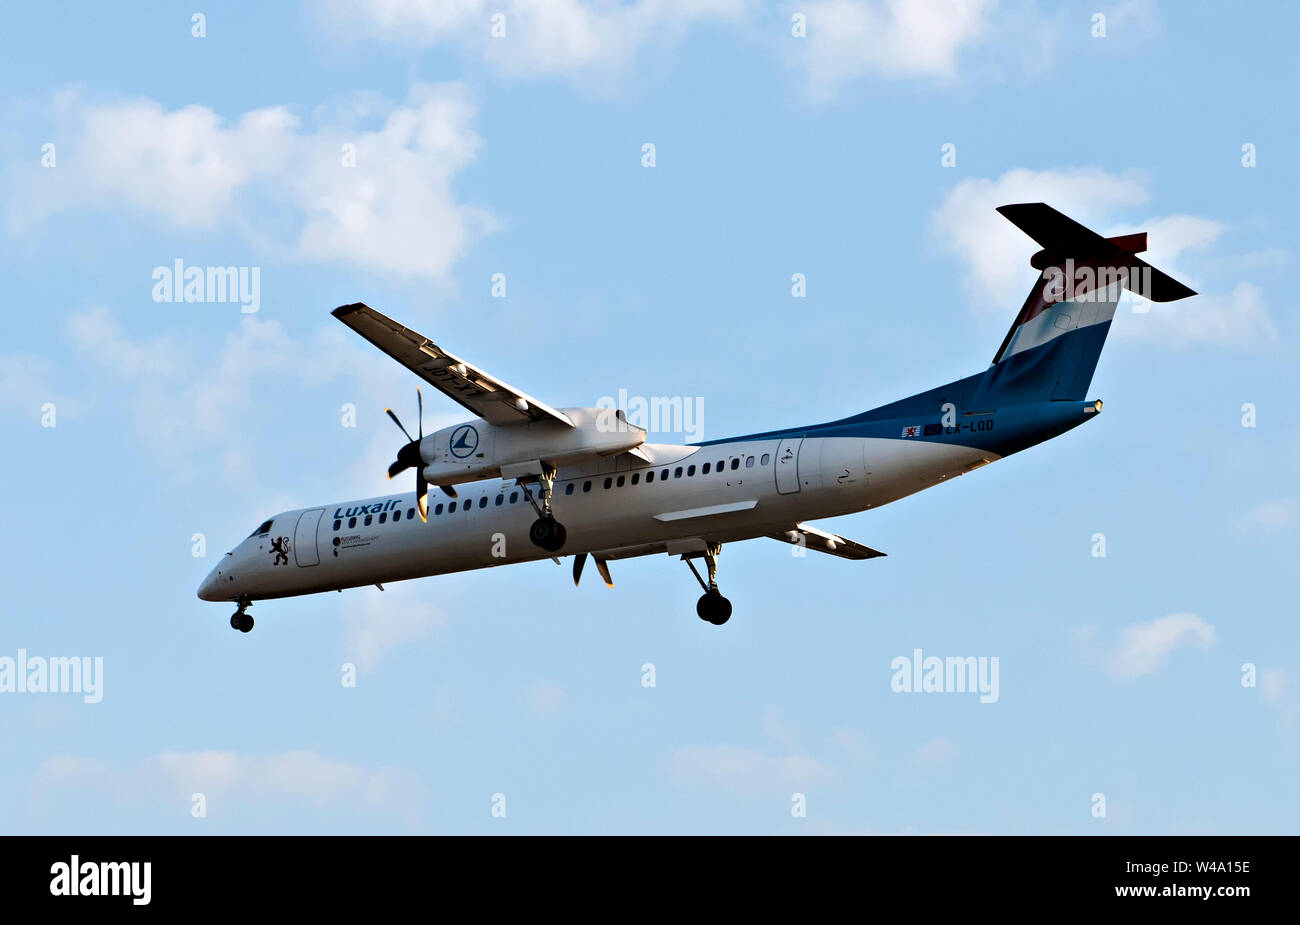 A Luxair De Havilland DHC-8 (Dash 8) on final approach to London City Airport, UK Stock Photo